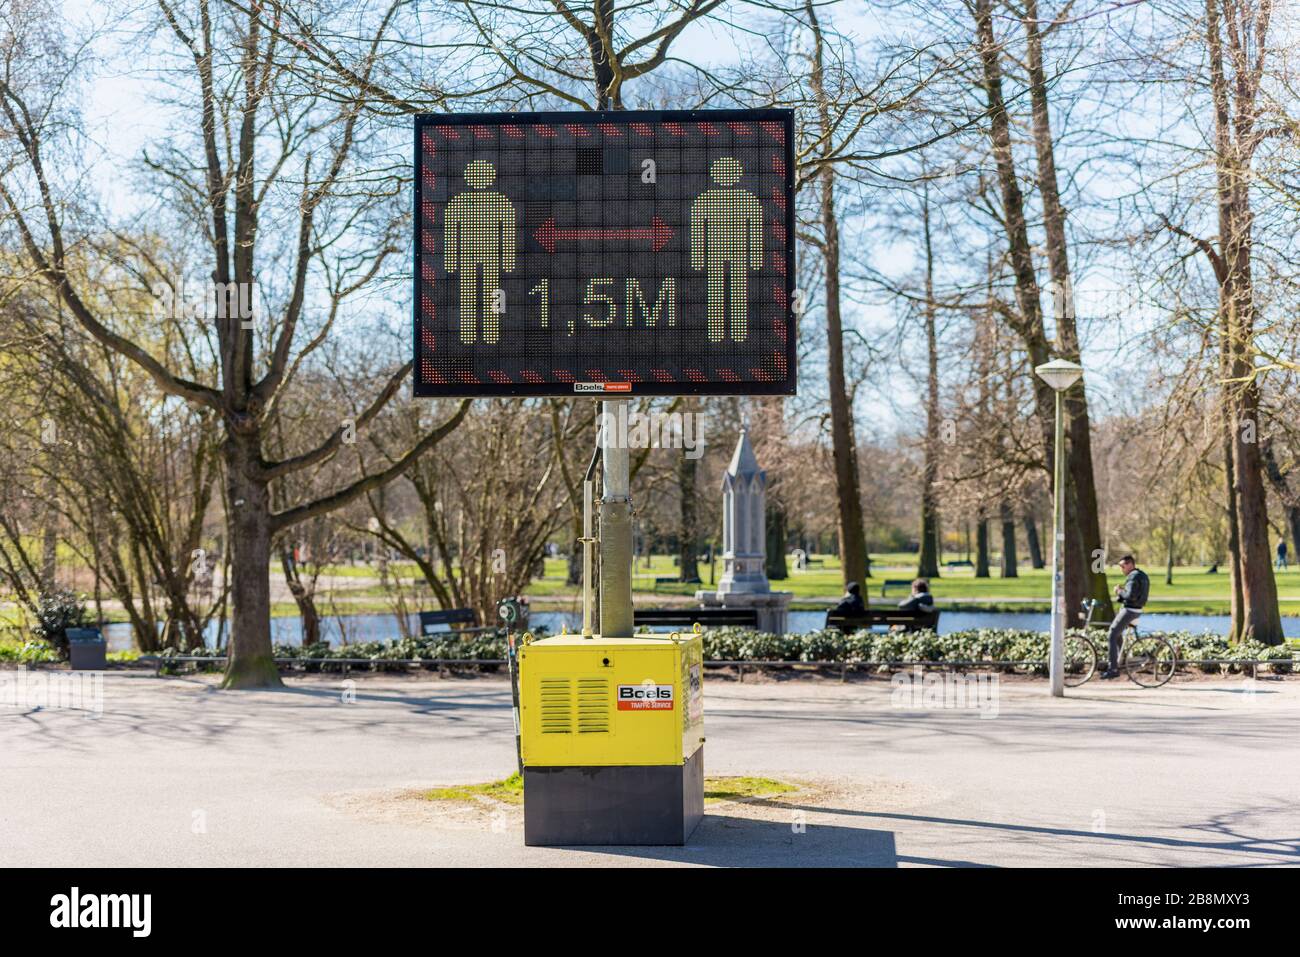 Keep Distance of 1.5 meter Warning Sign on Digital Display in a public park, reminding people of social distancing and avoiding the coronavirus spread Stock Photo